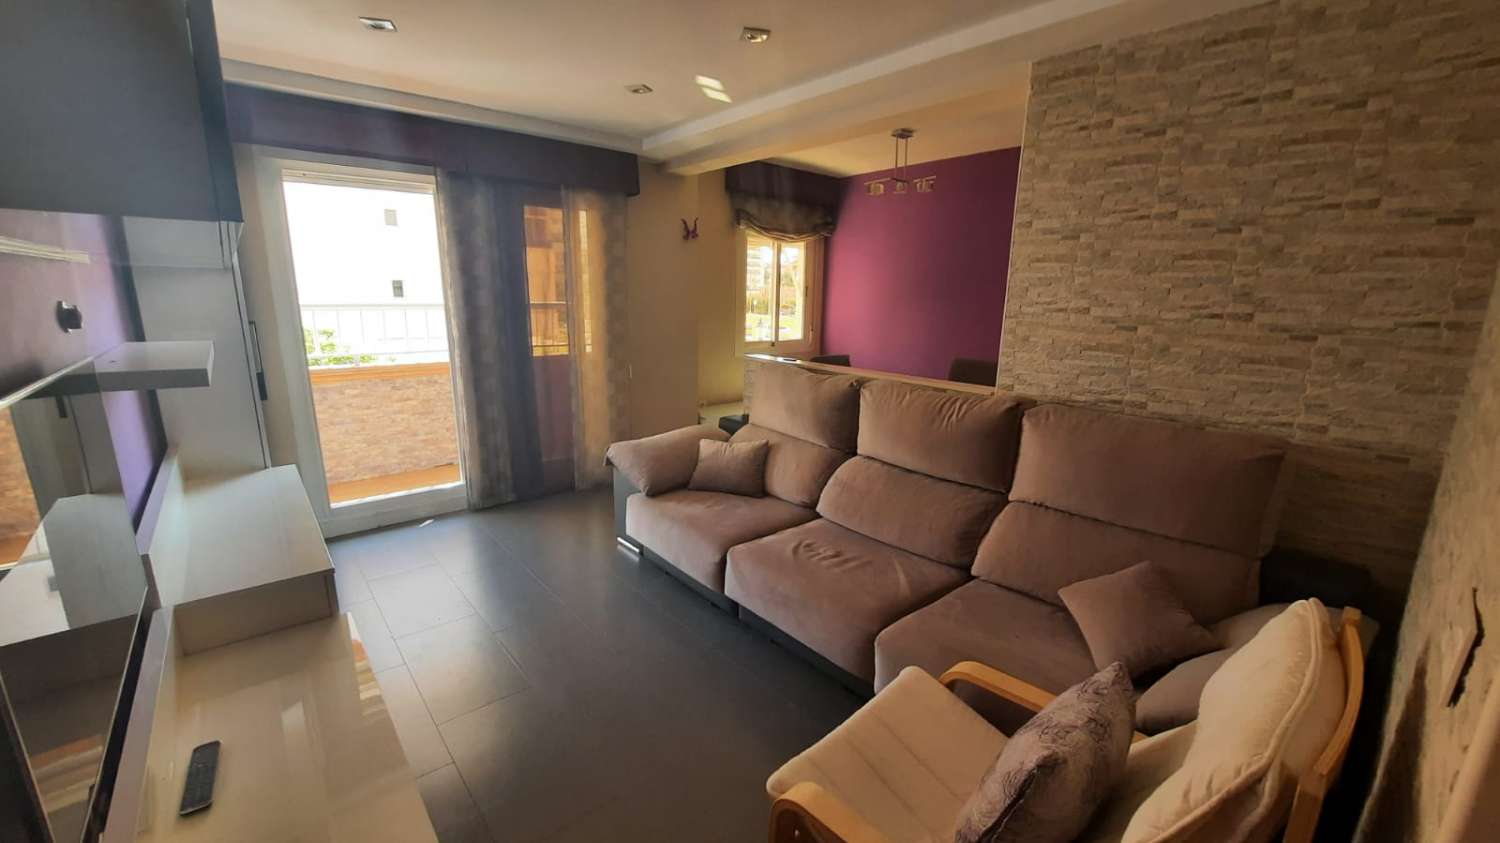 BEAUTIFUL TWO BEDROOM APARTMENT FOR LONG TERM IN MALAGA